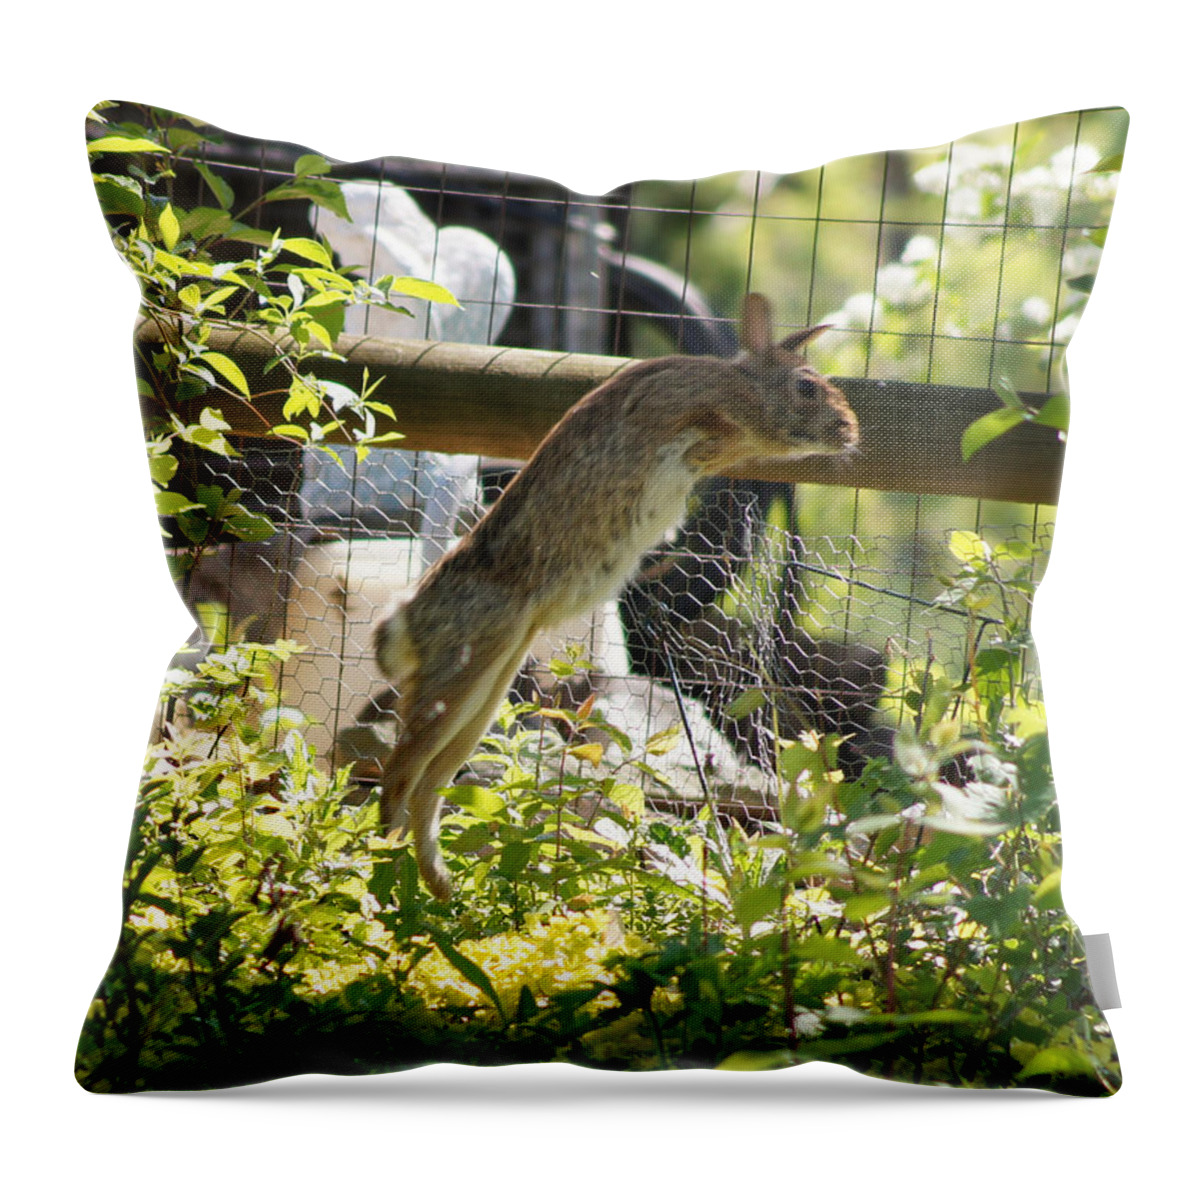 Rabbit Throw Pillow featuring the photograph Fence Jumping Rabbit by Robert E Alter Reflections of Infinity